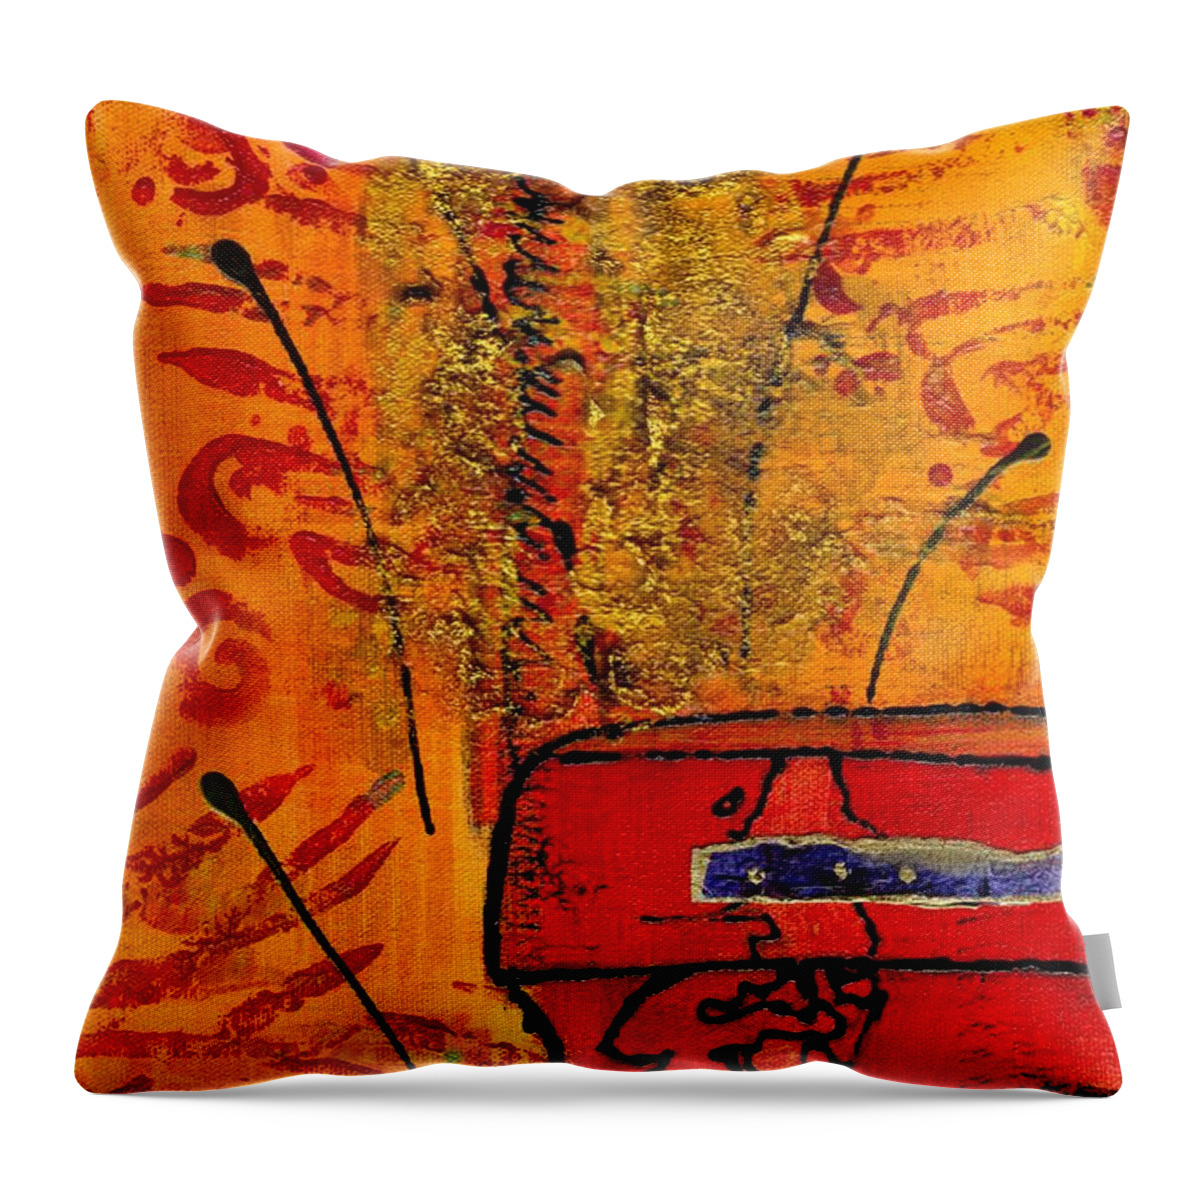 Acrylic Throw Pillow featuring the painting Her Vase by Angela L Walker